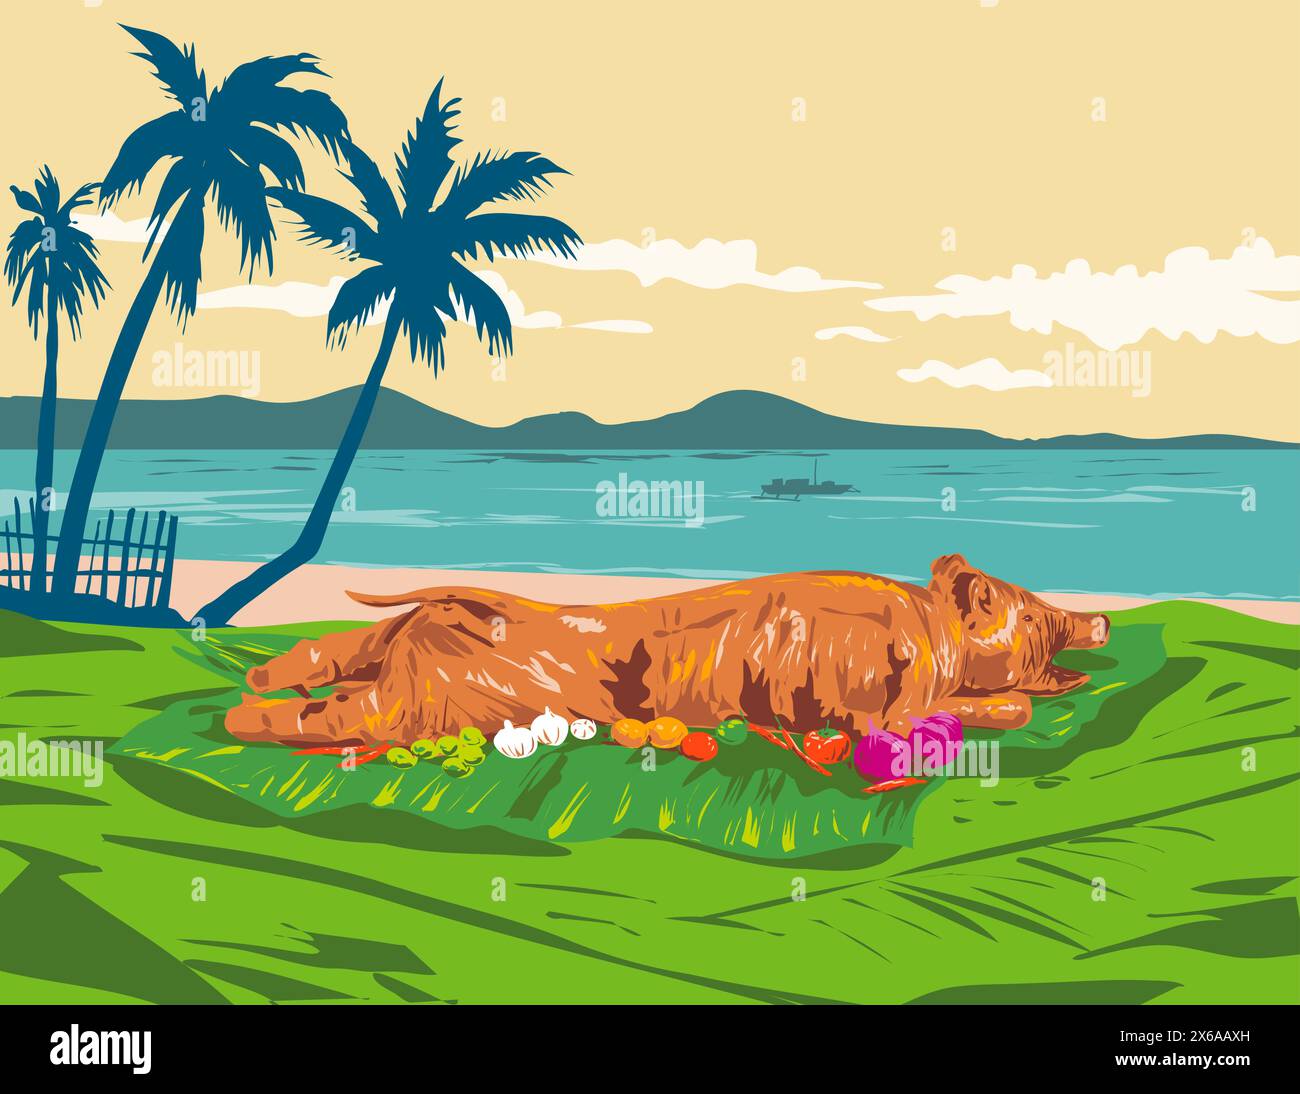 Art Deco or WPA poster art of a lechon, litson  or roasted suckling pig at the beach in Talisay City, Cebu, Philippines done in works project administ Stock Vector